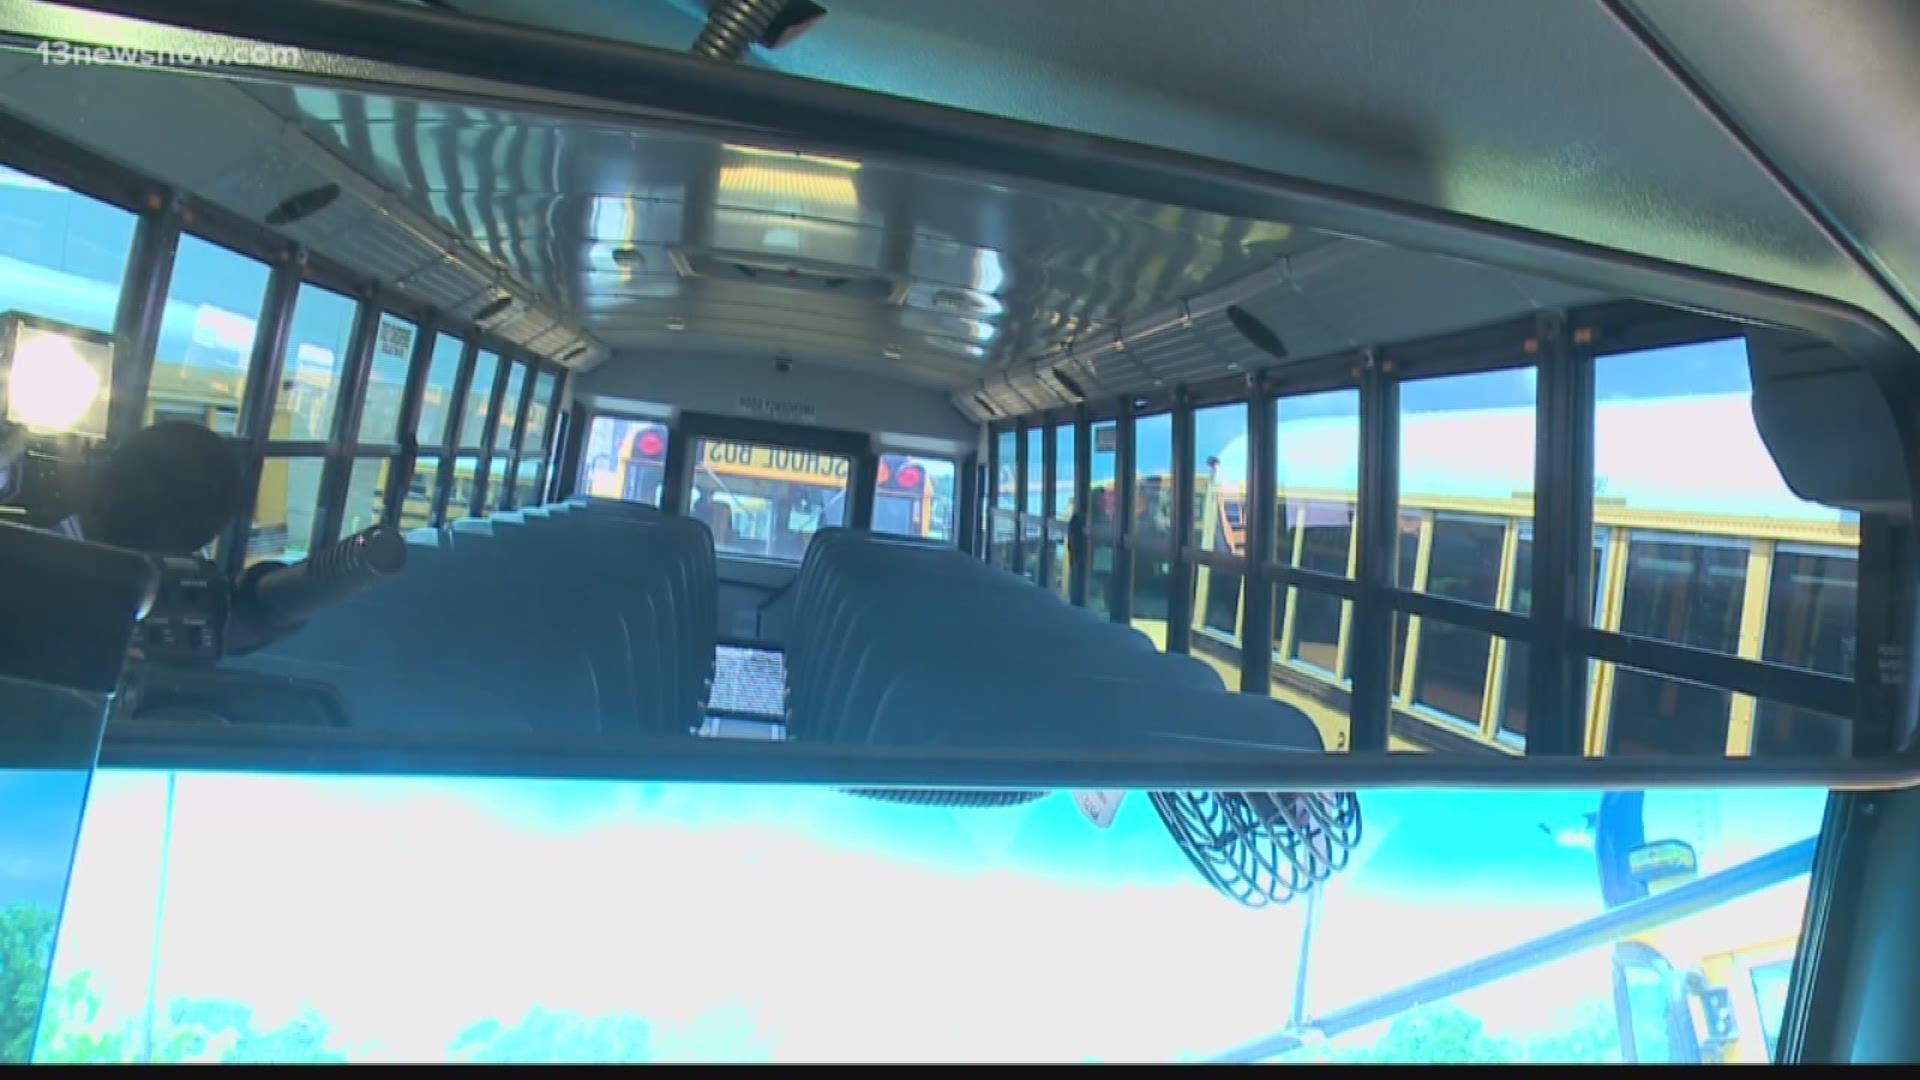 The NTSB is in favor of adding safety belts to school buses.